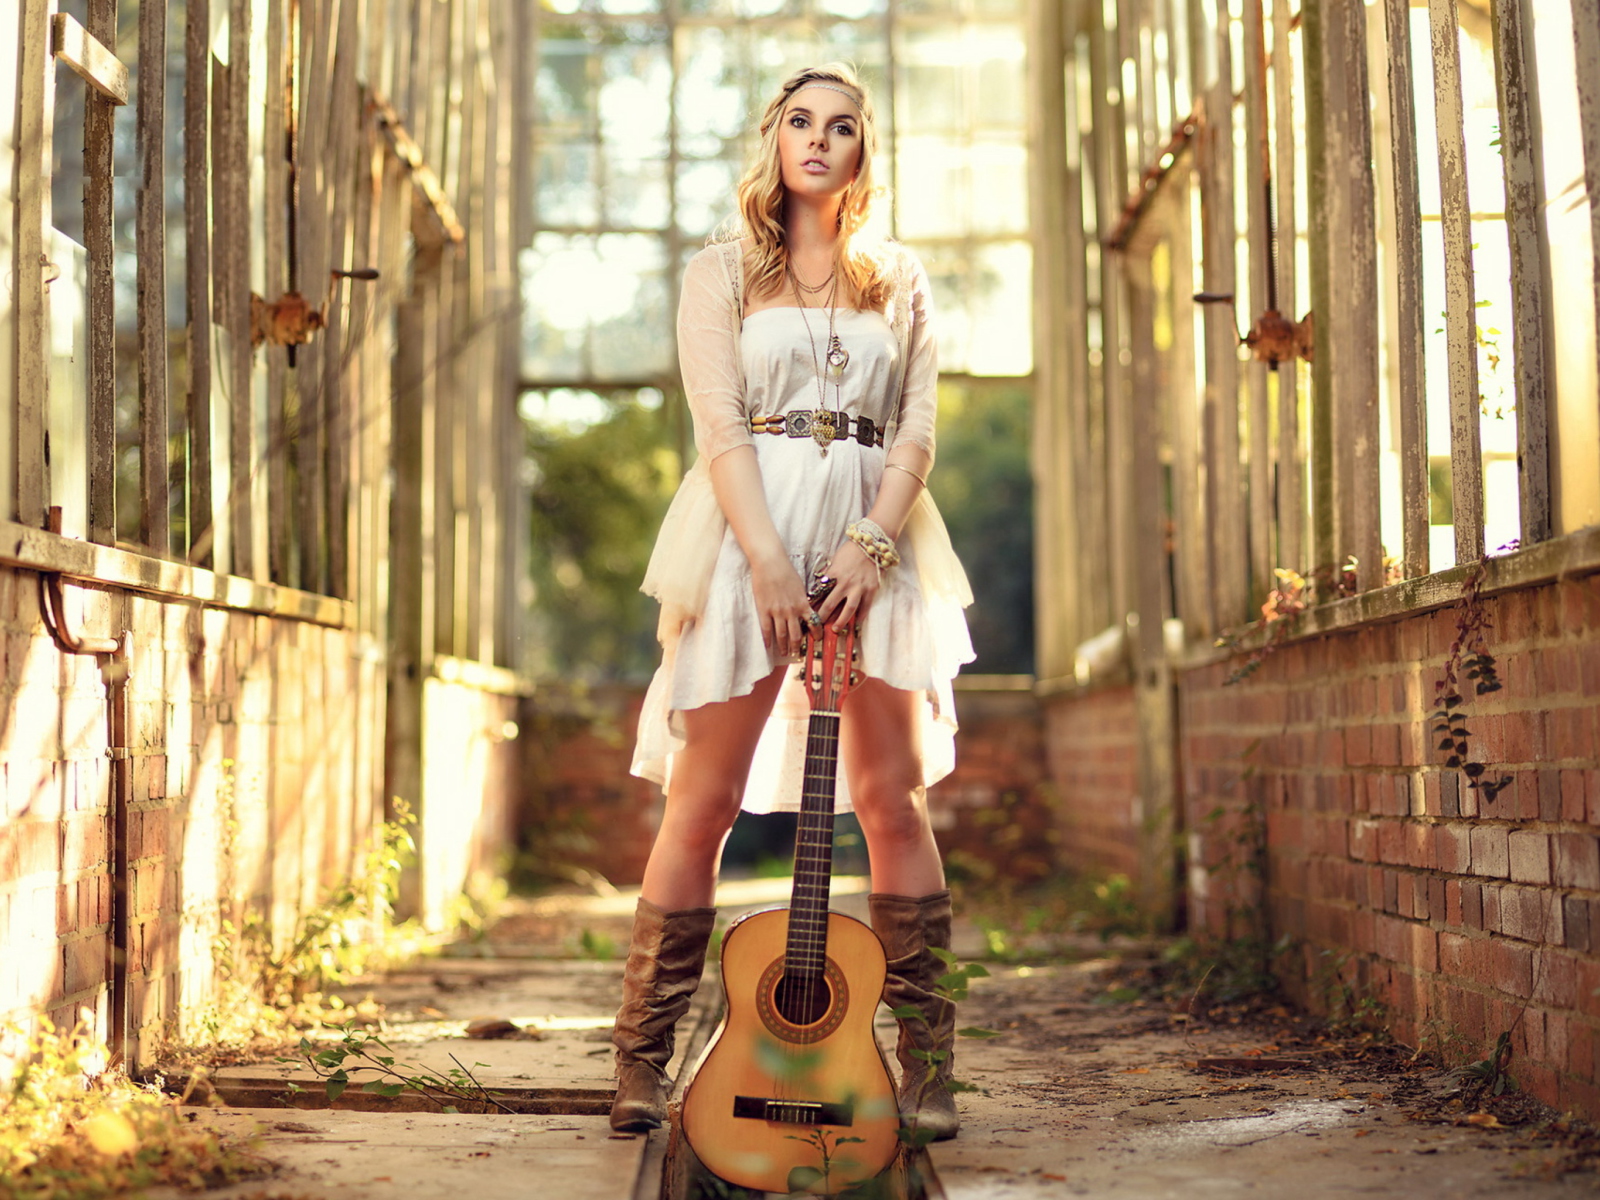 Das Girl With Guitar Chic Country Style Wallpaper 1600x1200